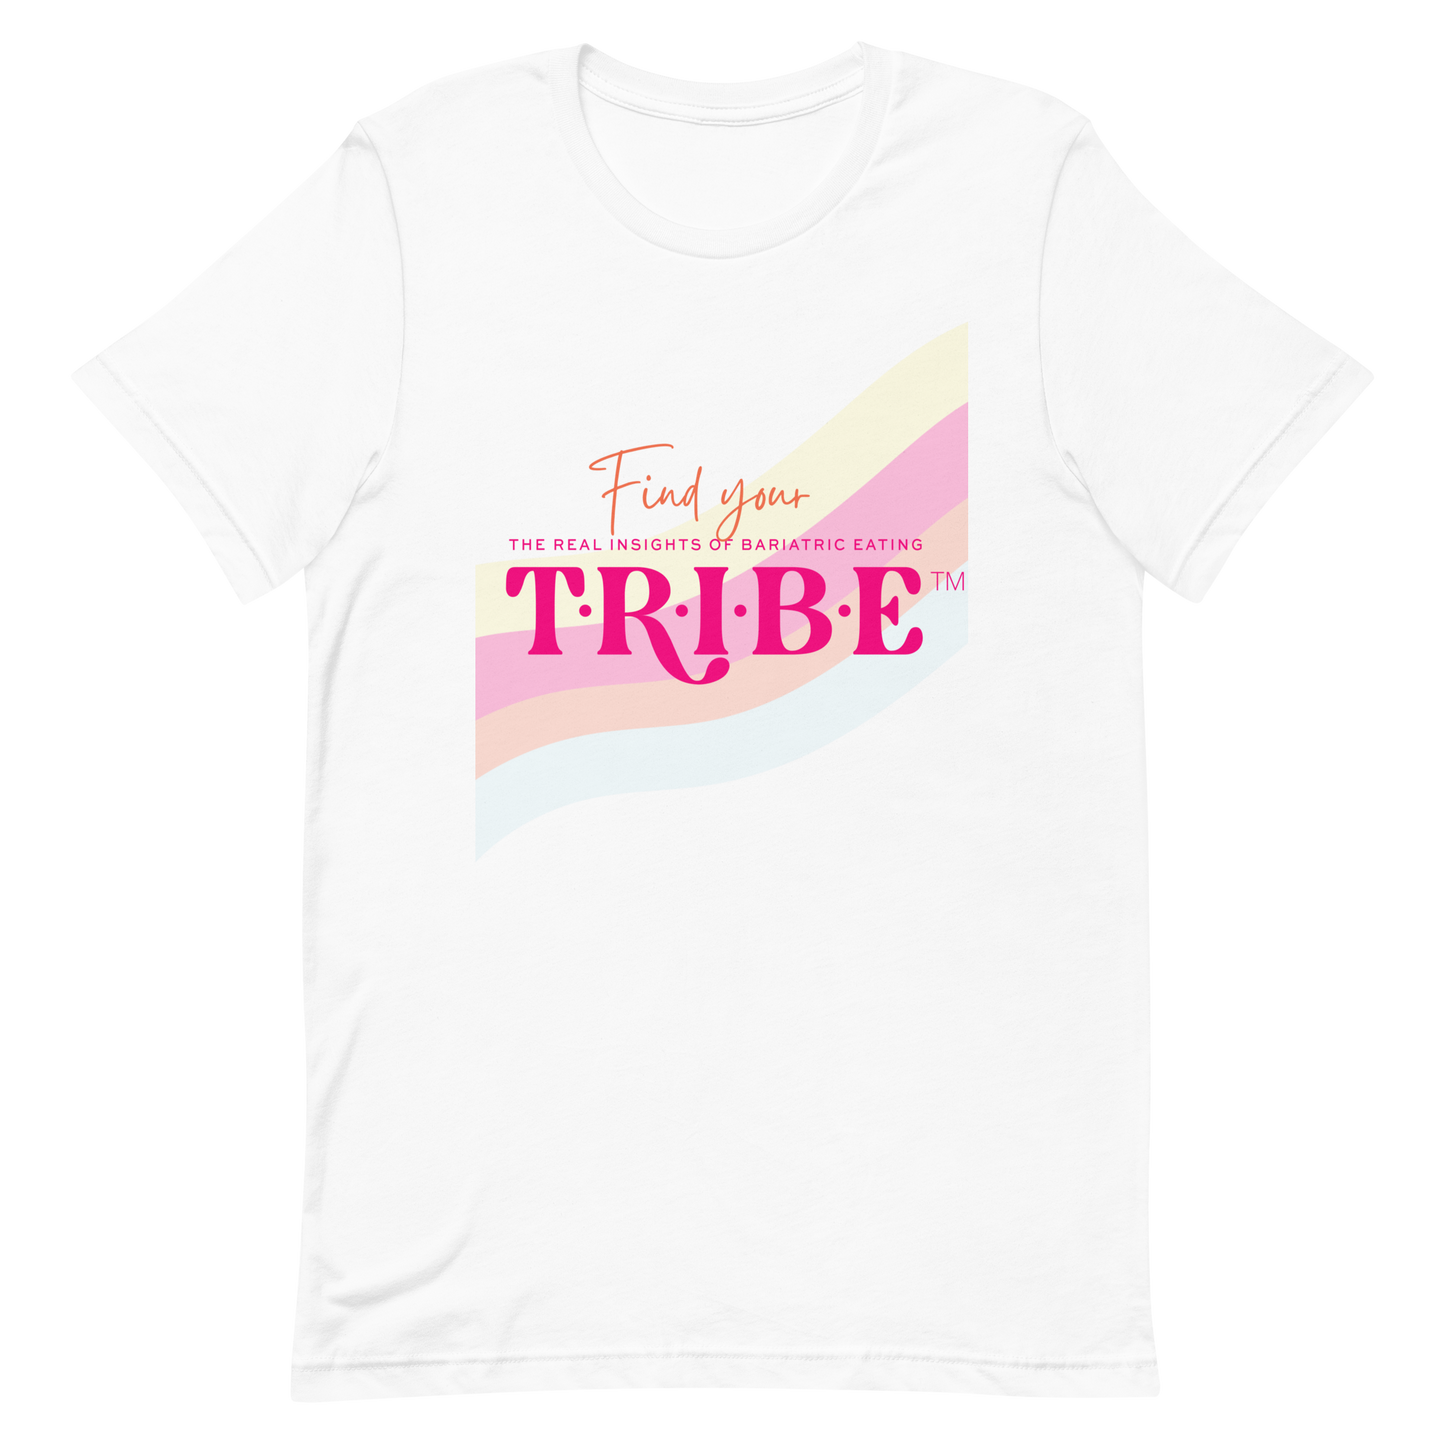 TRIBE T-SHIRT - FIND YOUR TRIBE